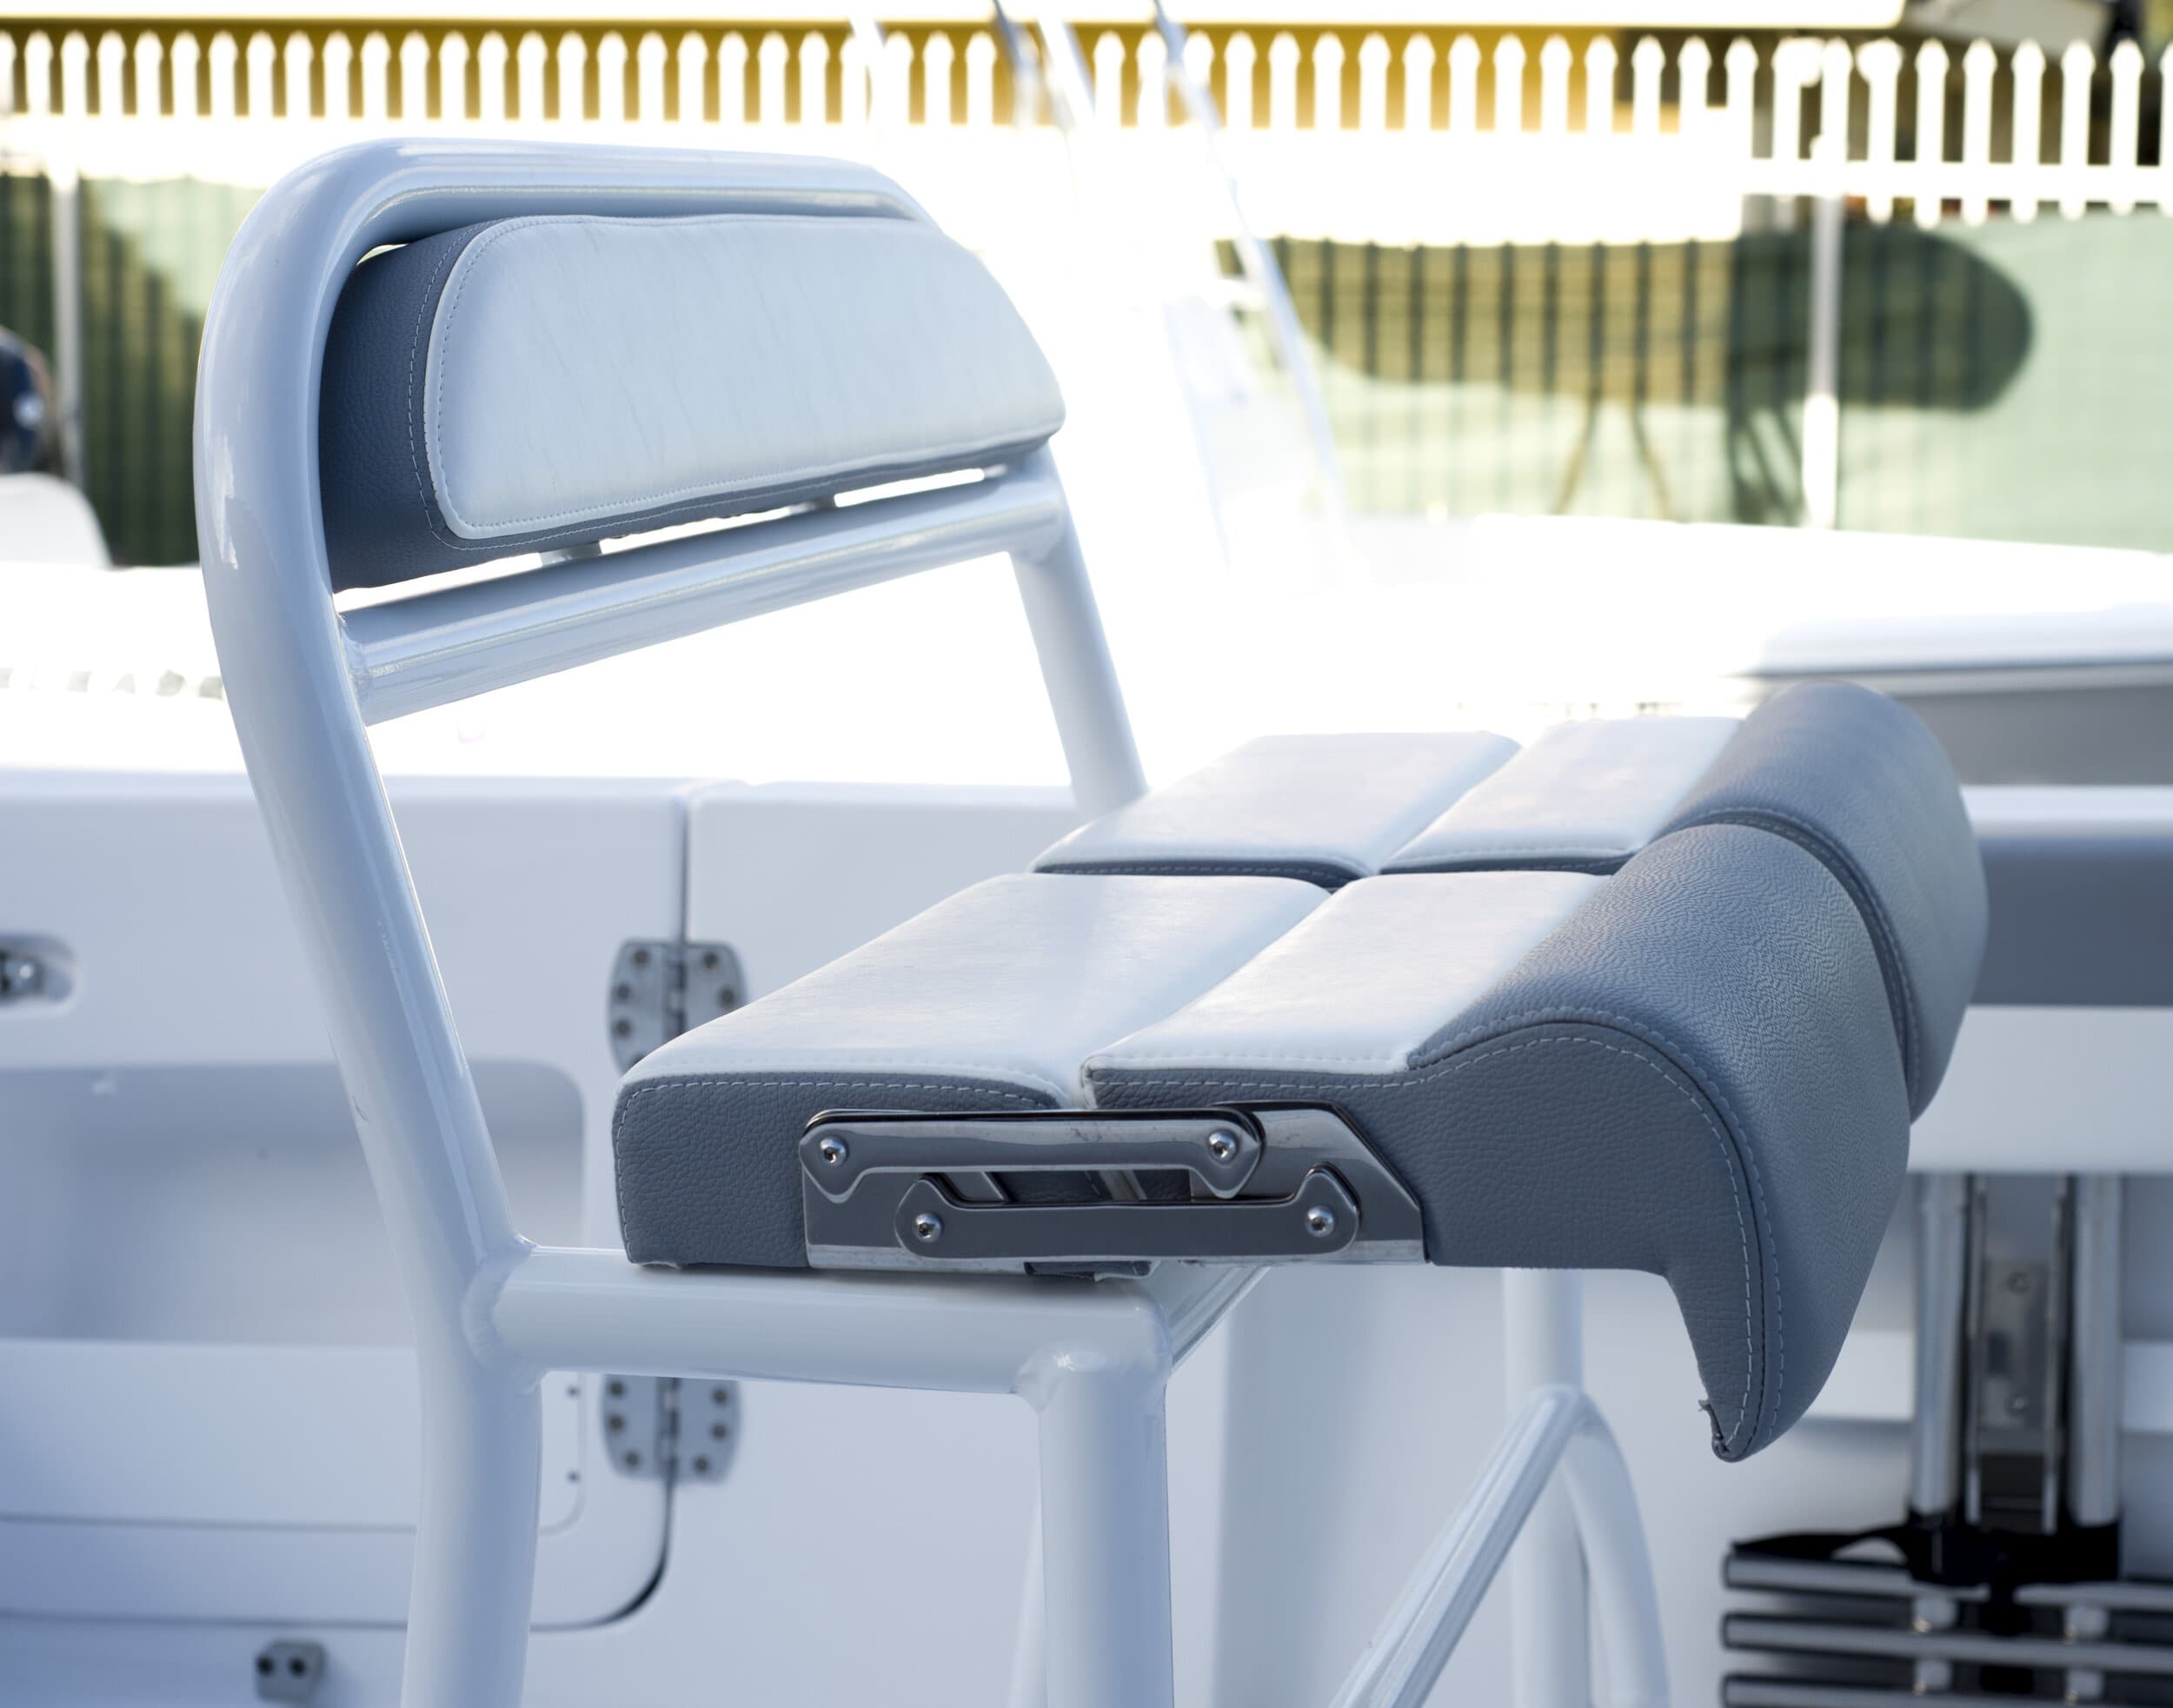 240 R or 240 RX AFT Backrest Cushion — Release Boats